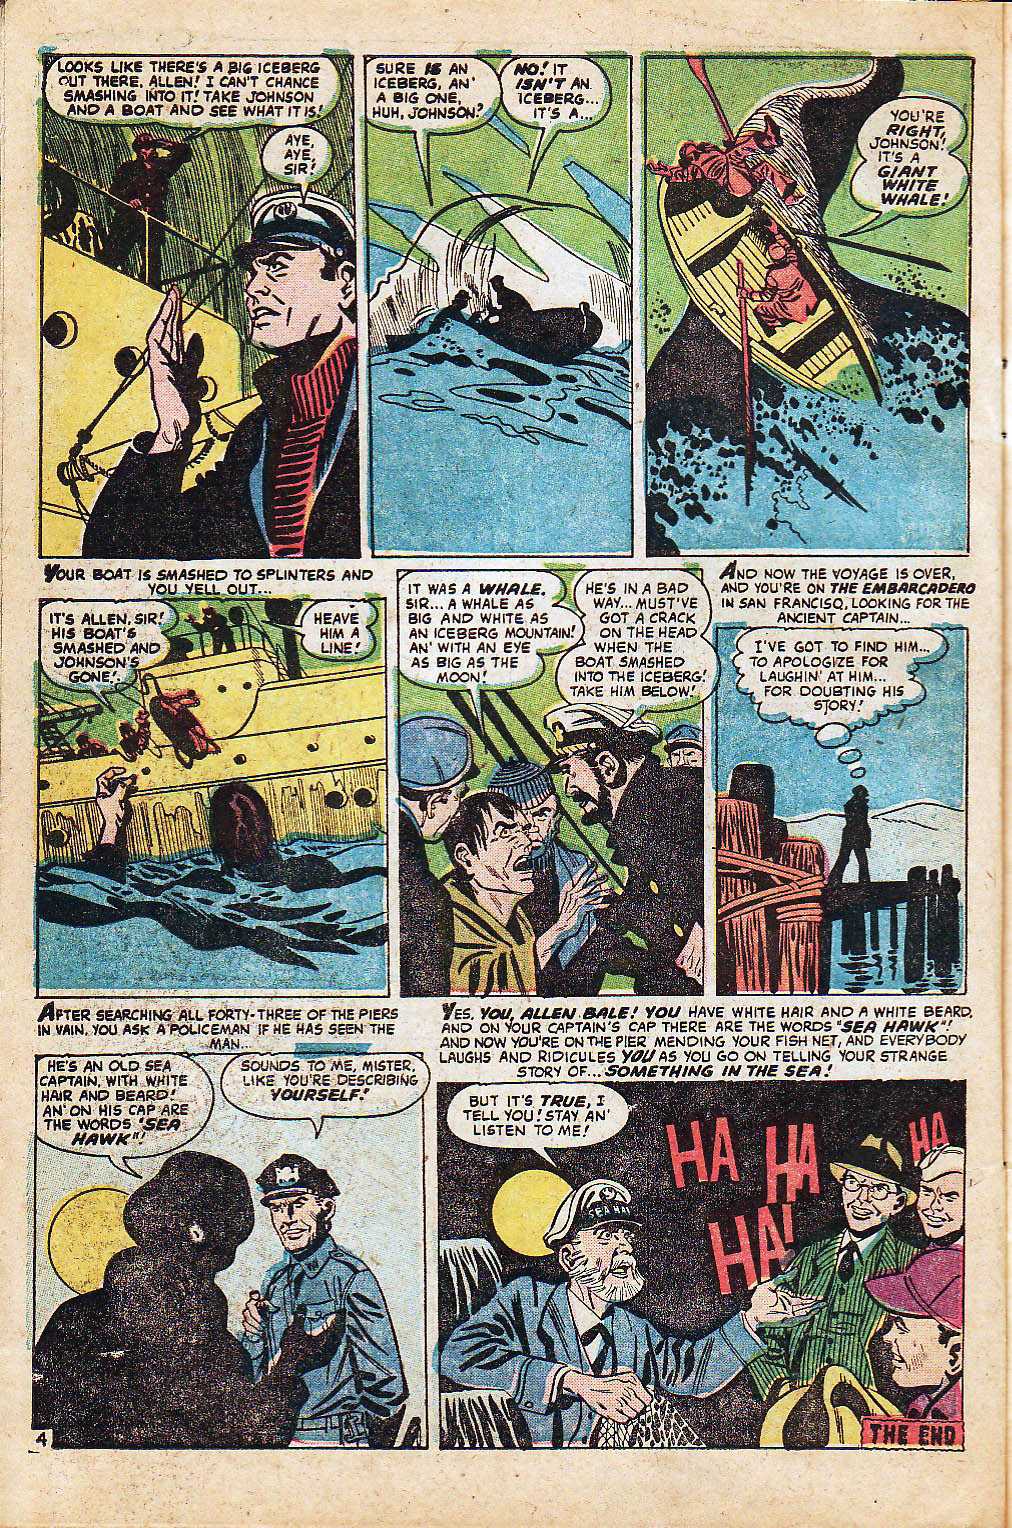 Marvel Tales (1949) 154 Page 5